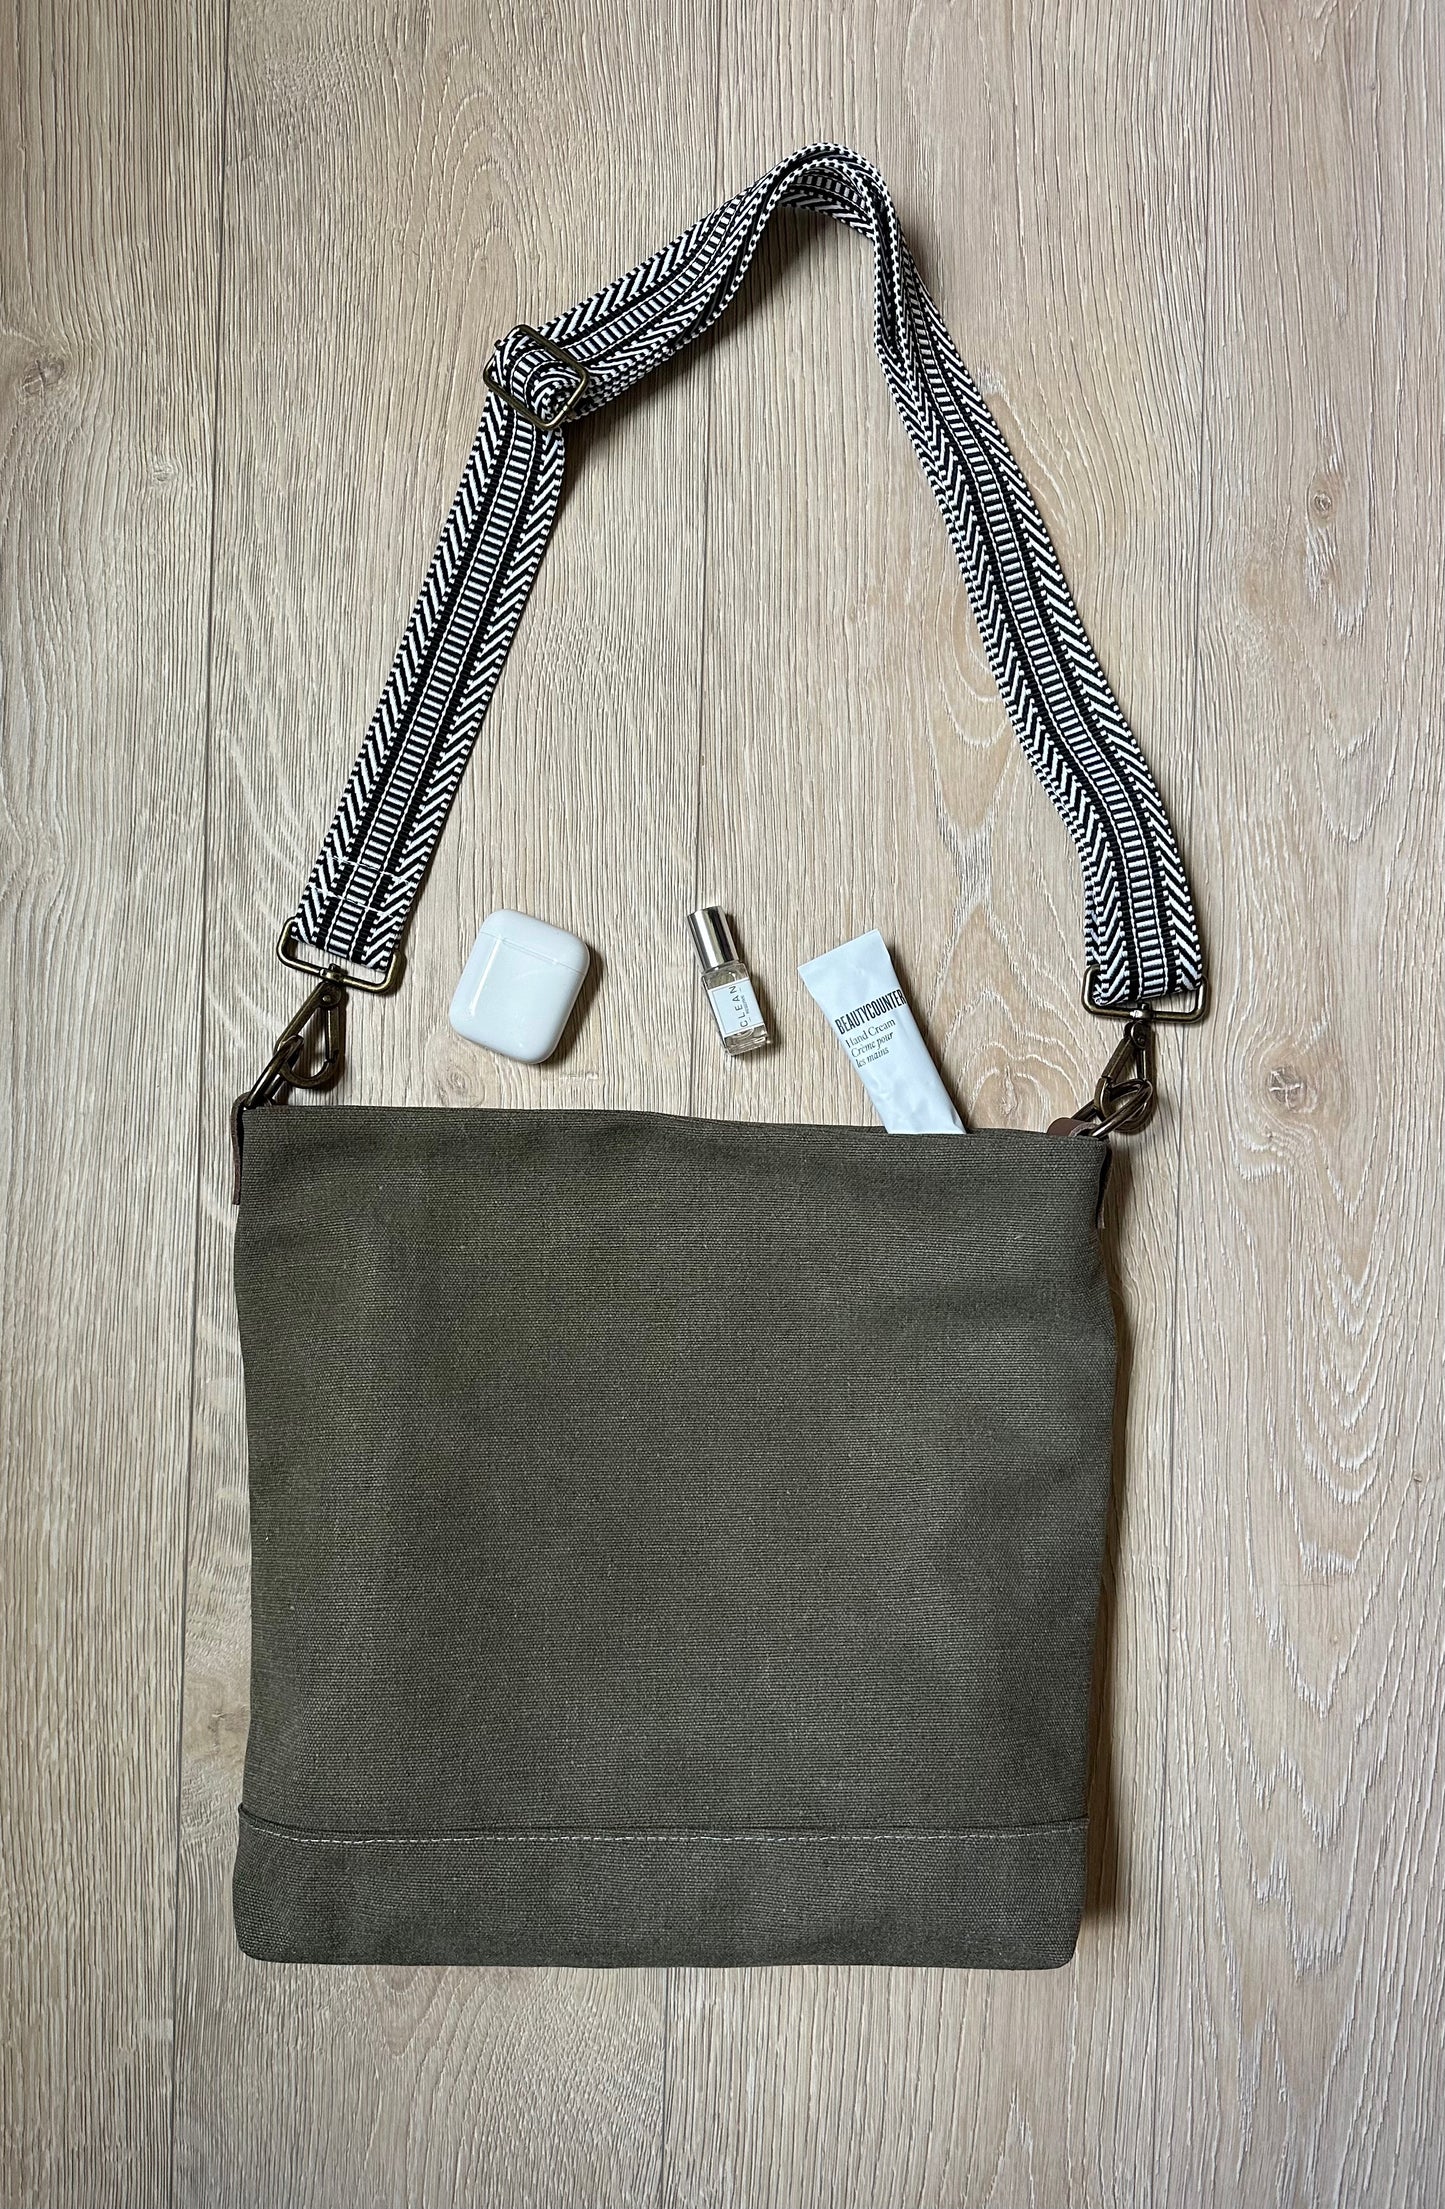 Green Canvas Cross Body Bag with Black and White Strap